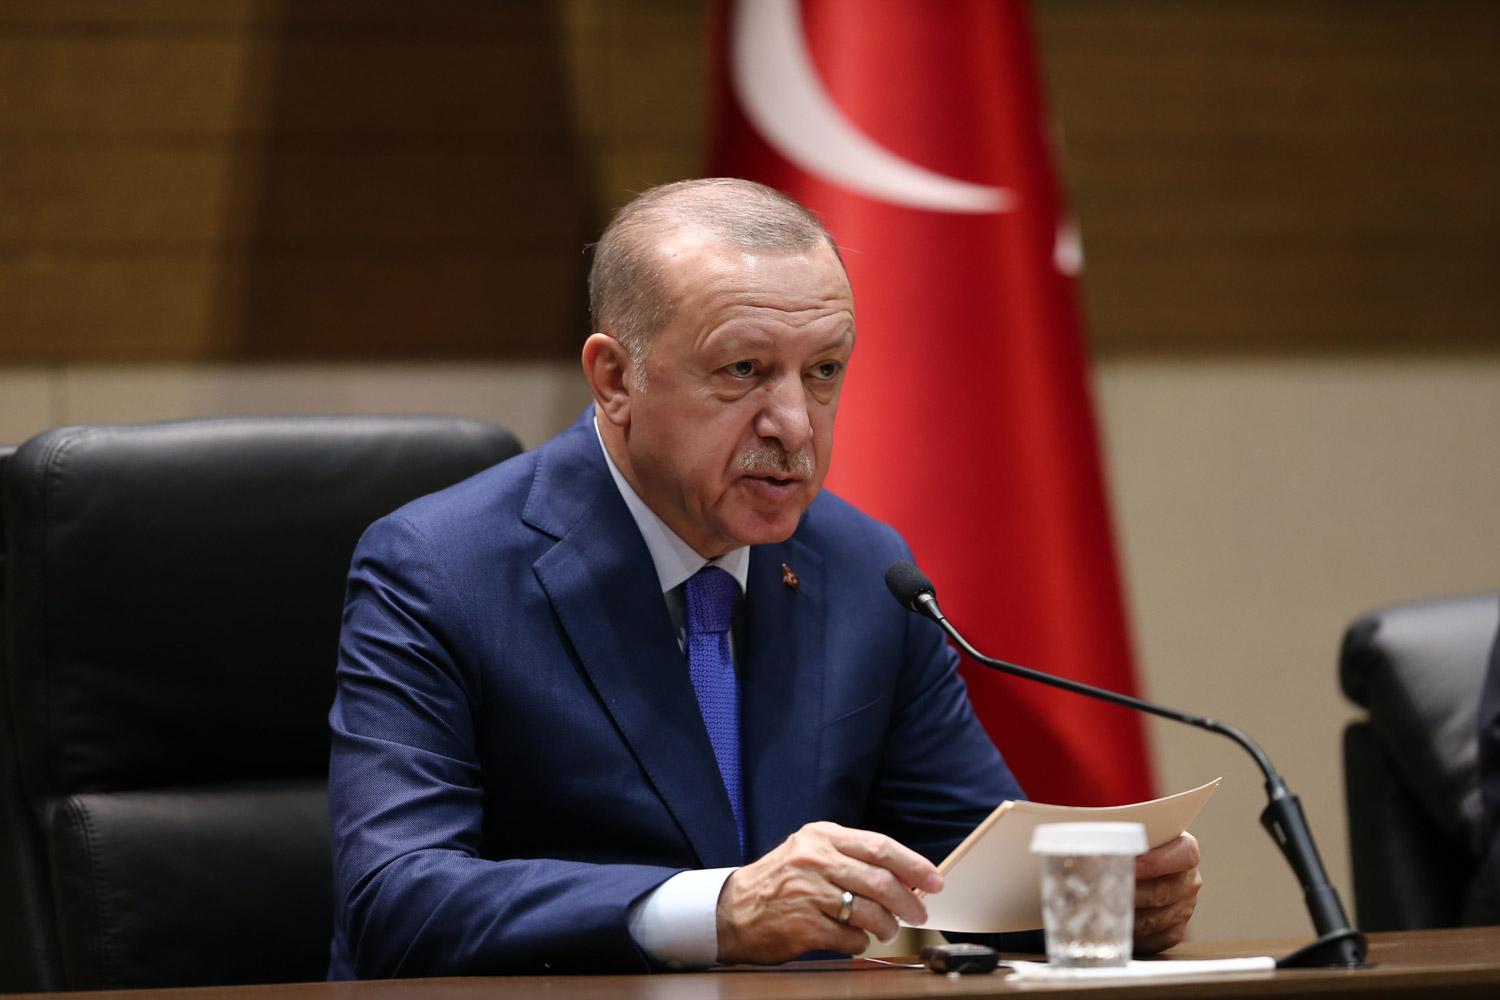 Turkish President Recep Tayyip Erdogan said the summit could be "an important step on the way to cementing the ceasefire and a political solution"